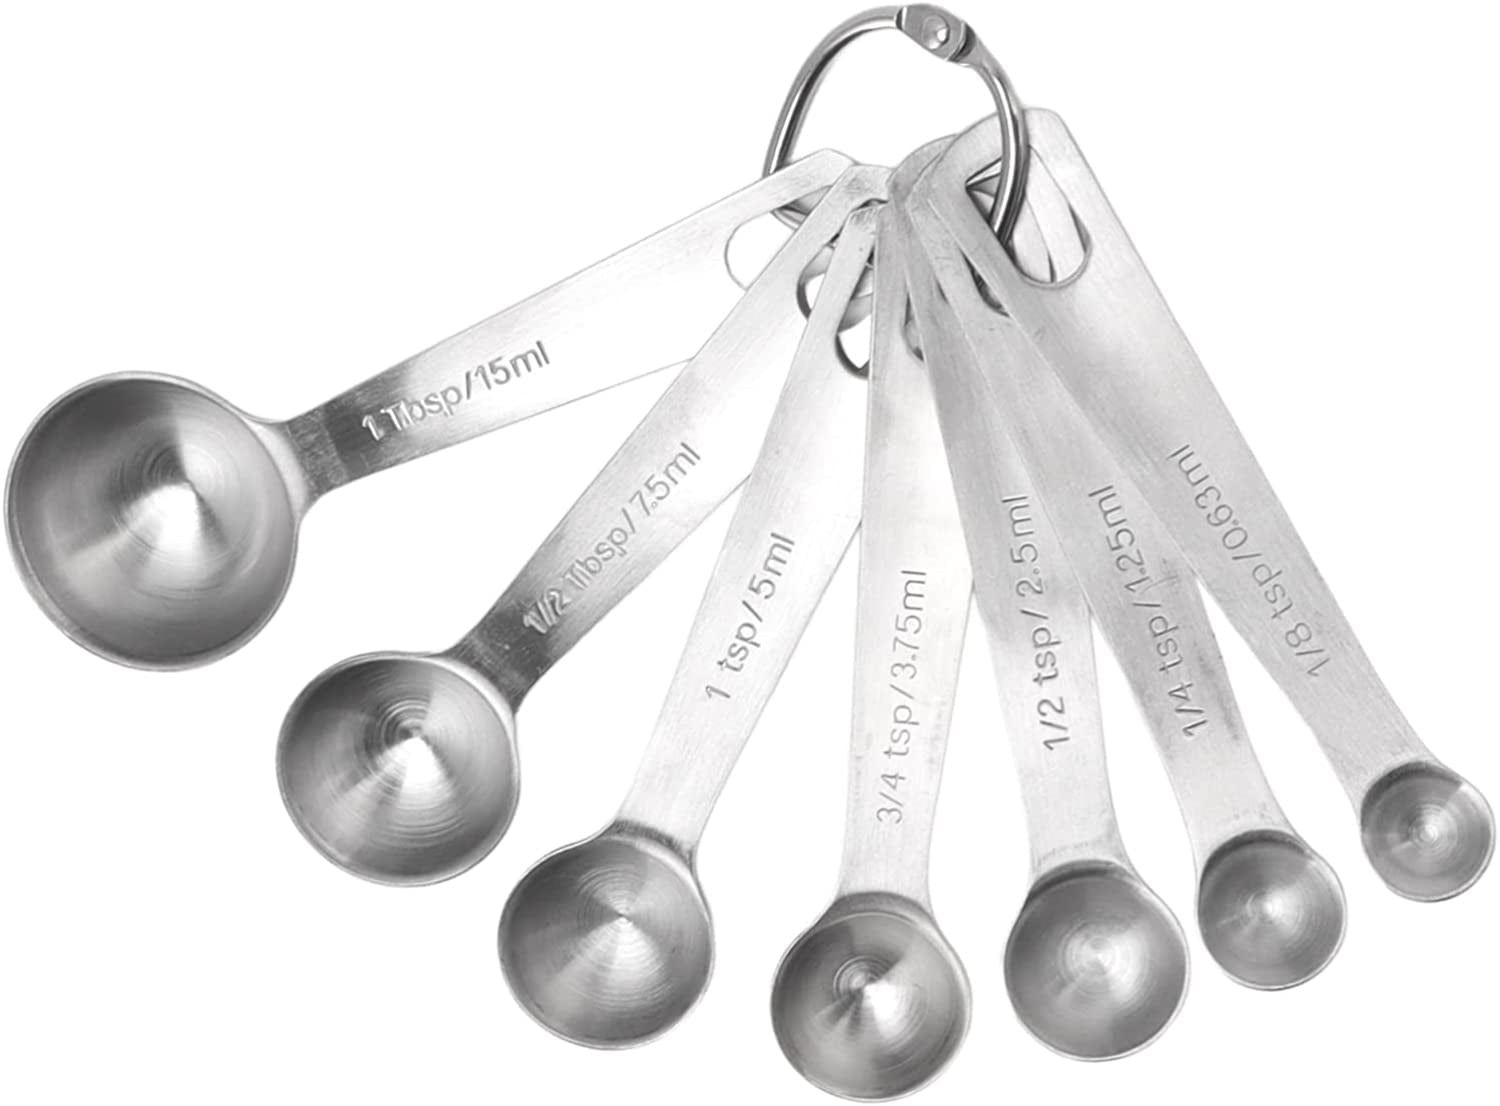 1 Set Useful Stainless Steel Measuring Spoon Polished Surface